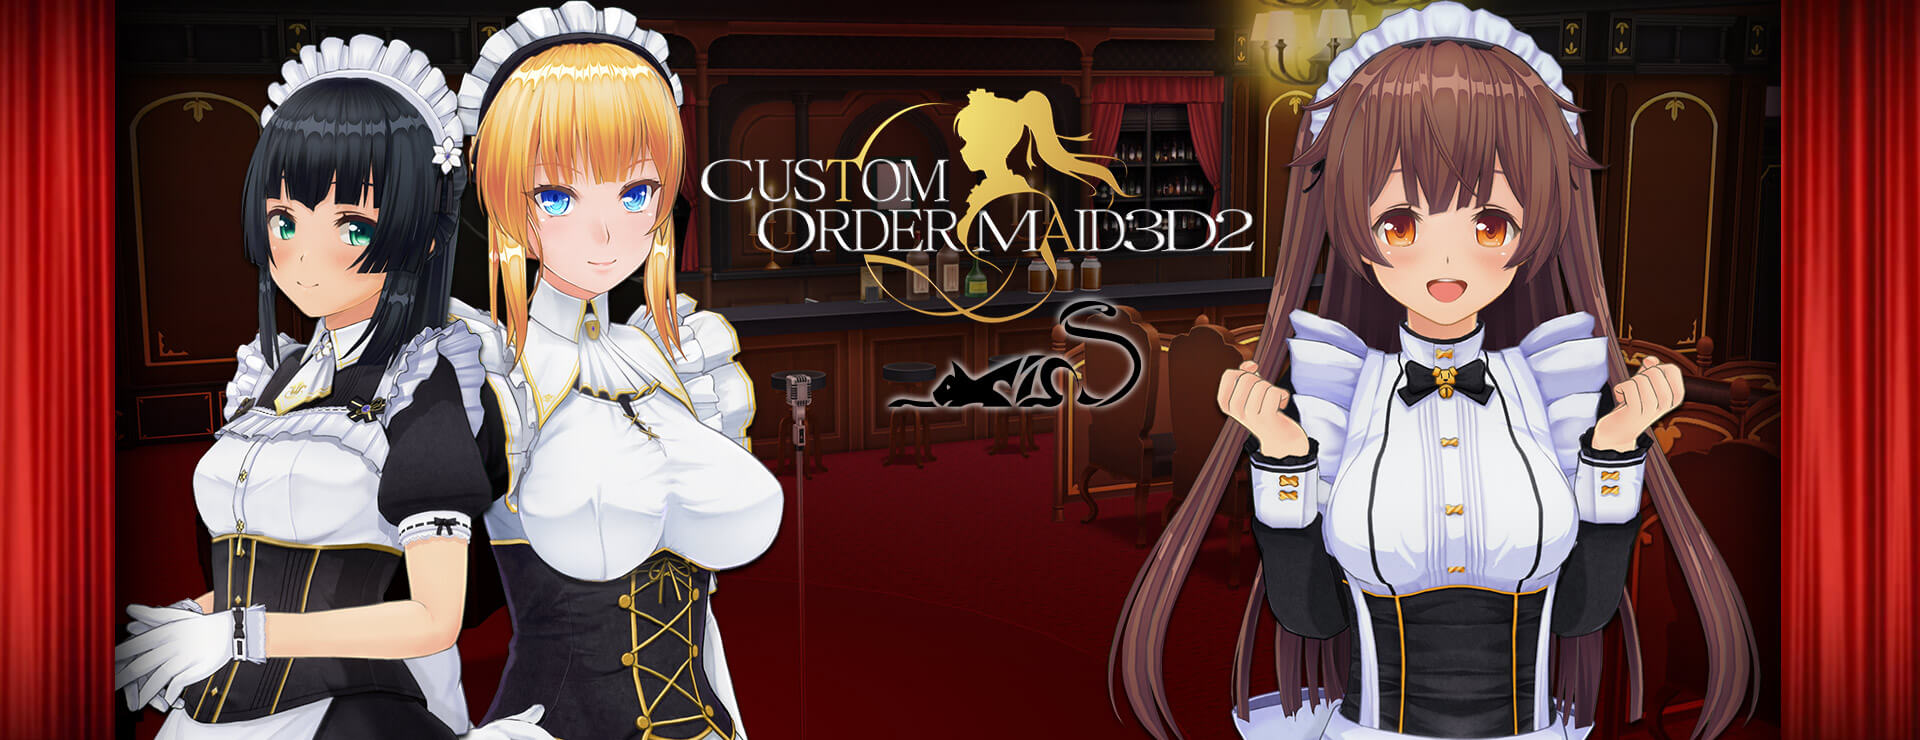 Custom Order Maid 3D 2: Happy New Year Lucky Bag 2024 type Adult - Simulation Game